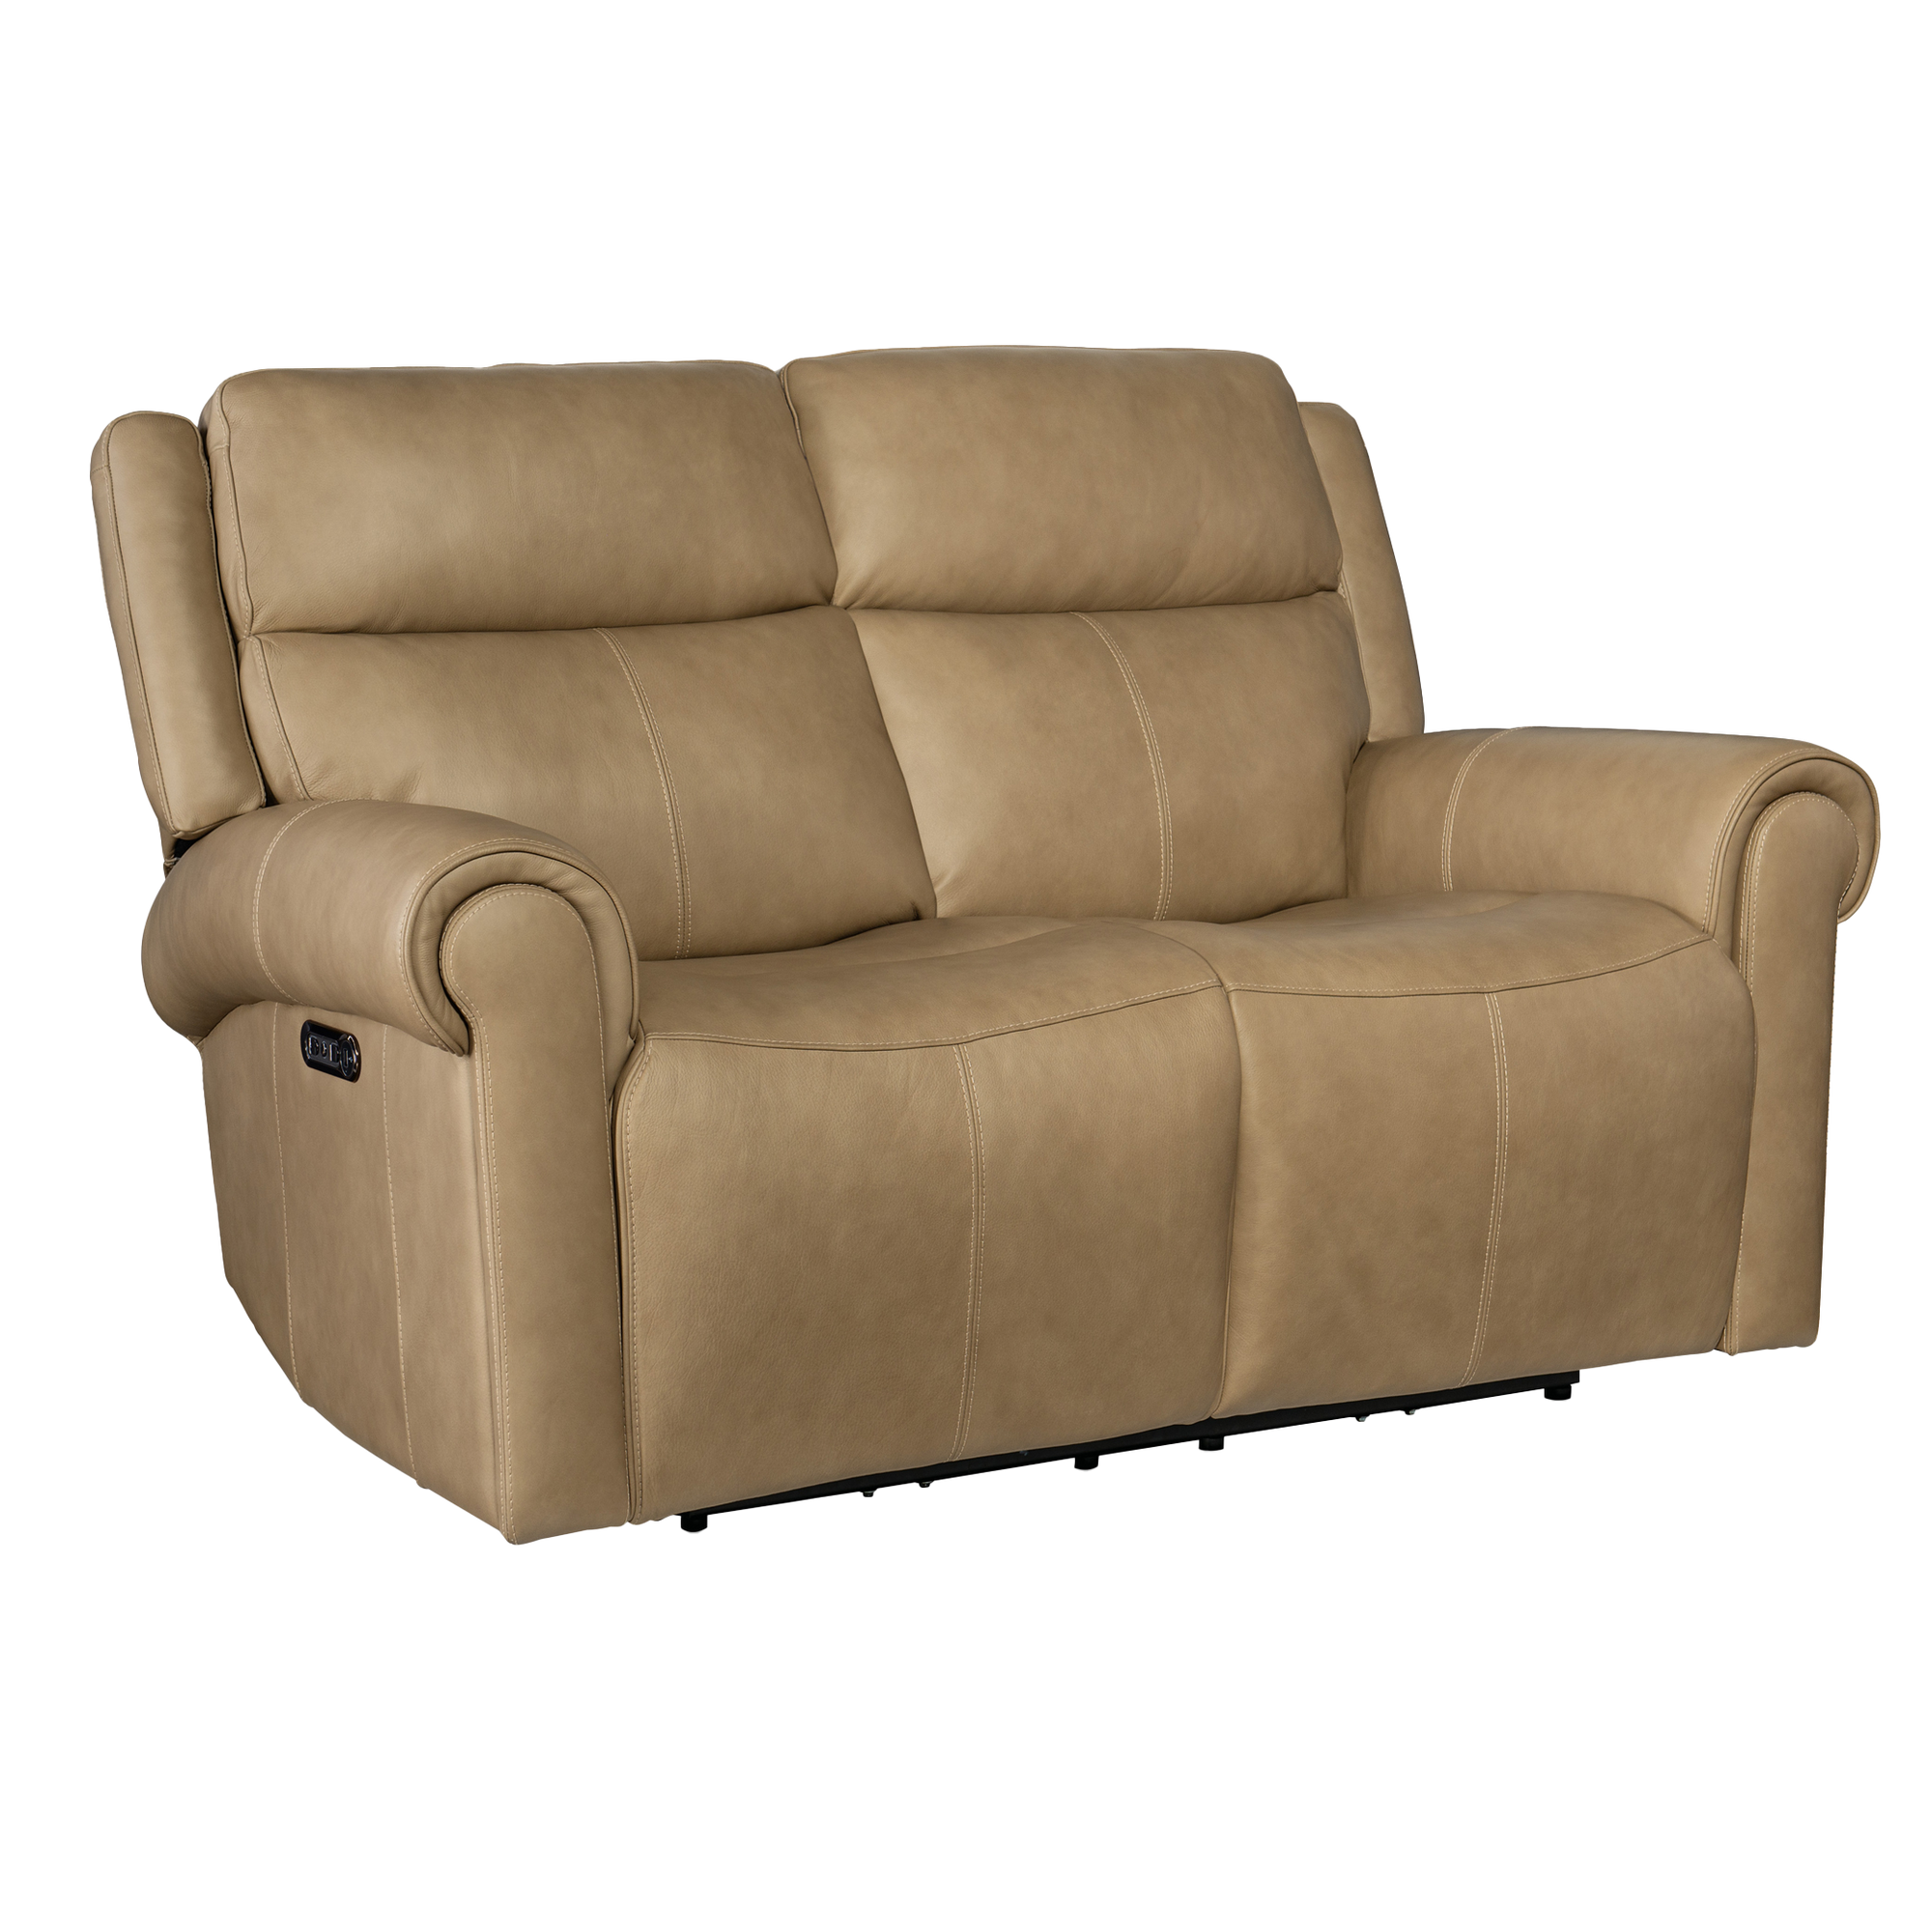 Ondrei 66" Wide Upholstered Leather Loveseat